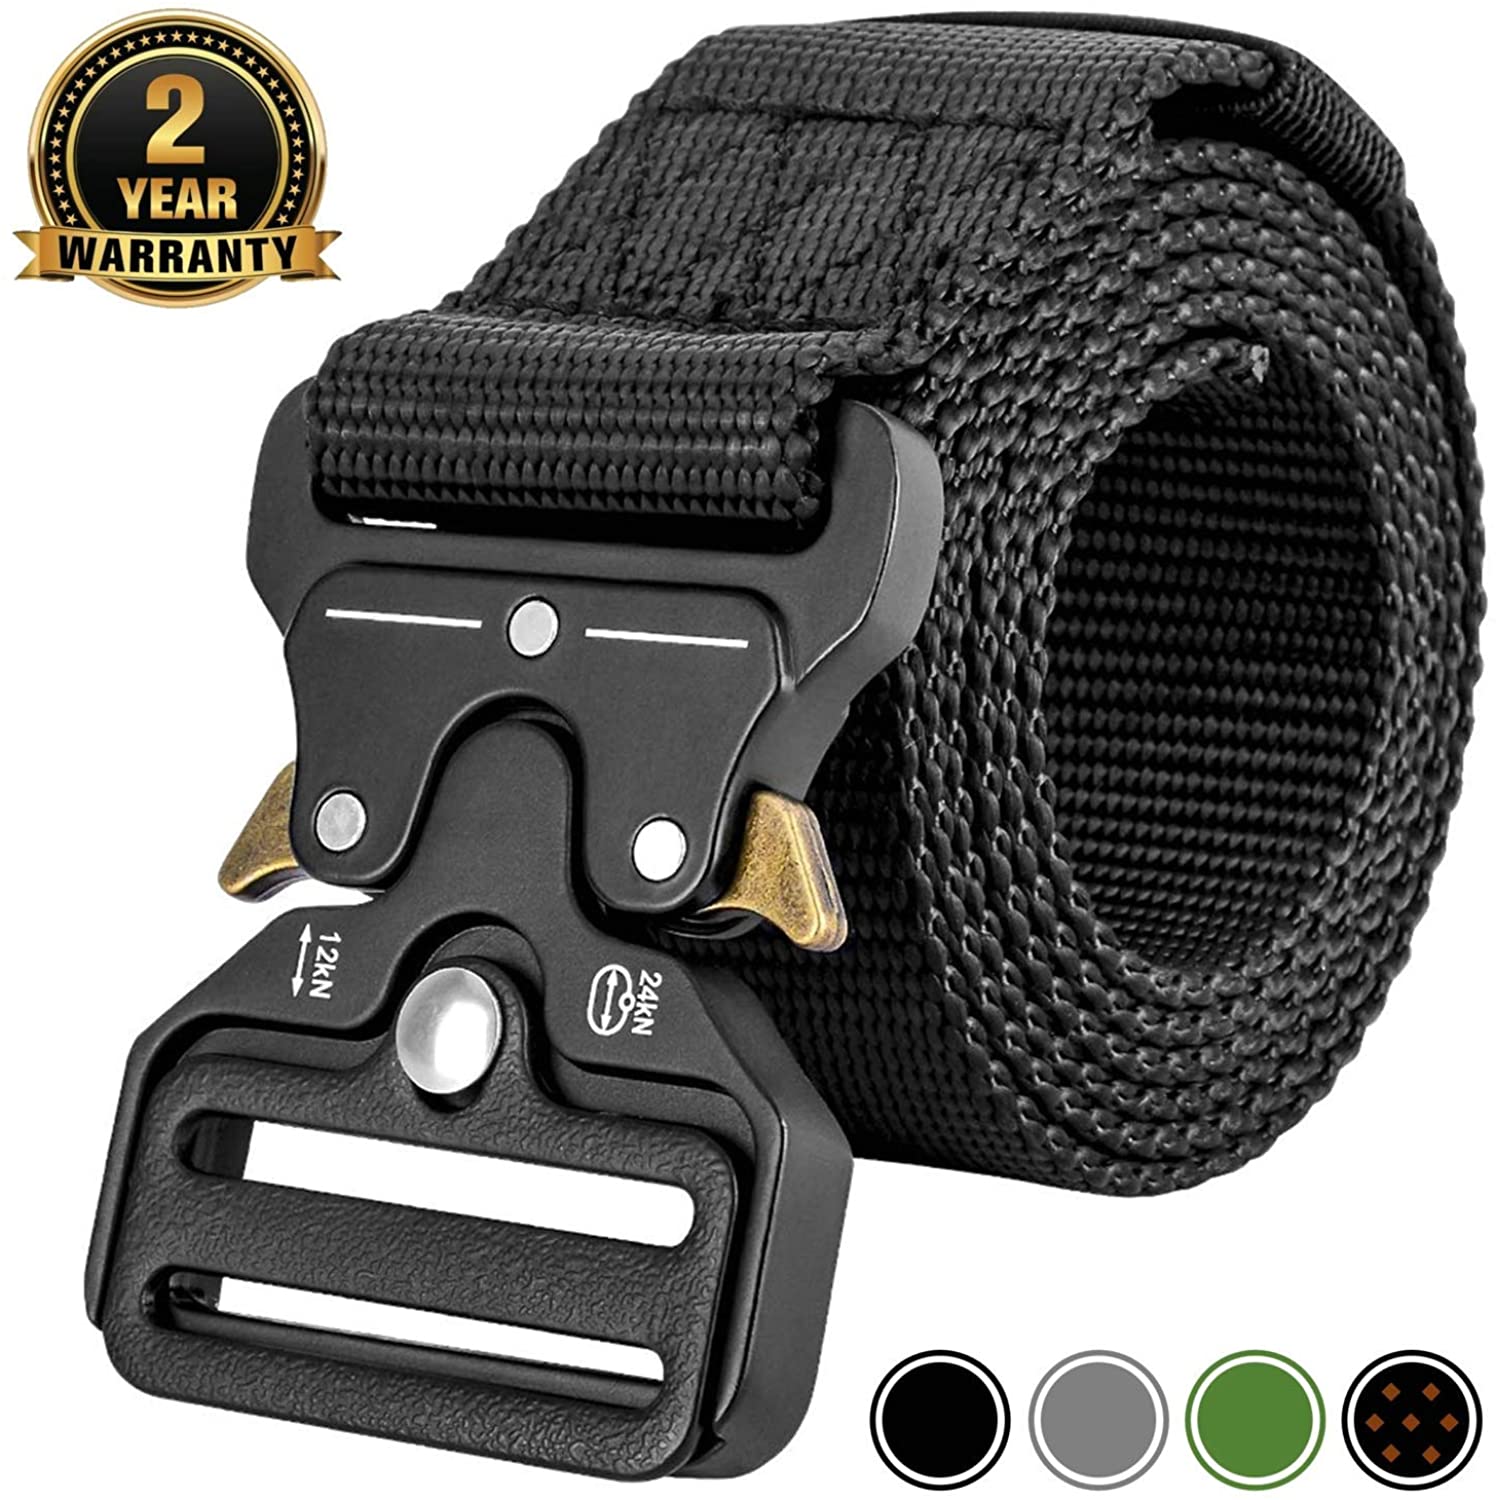 MOZETO Tactical Belts for Men Military Style Work Hiking Riggers Web Gun  Belt with Heavy Duty Quick Release Metal Buckle